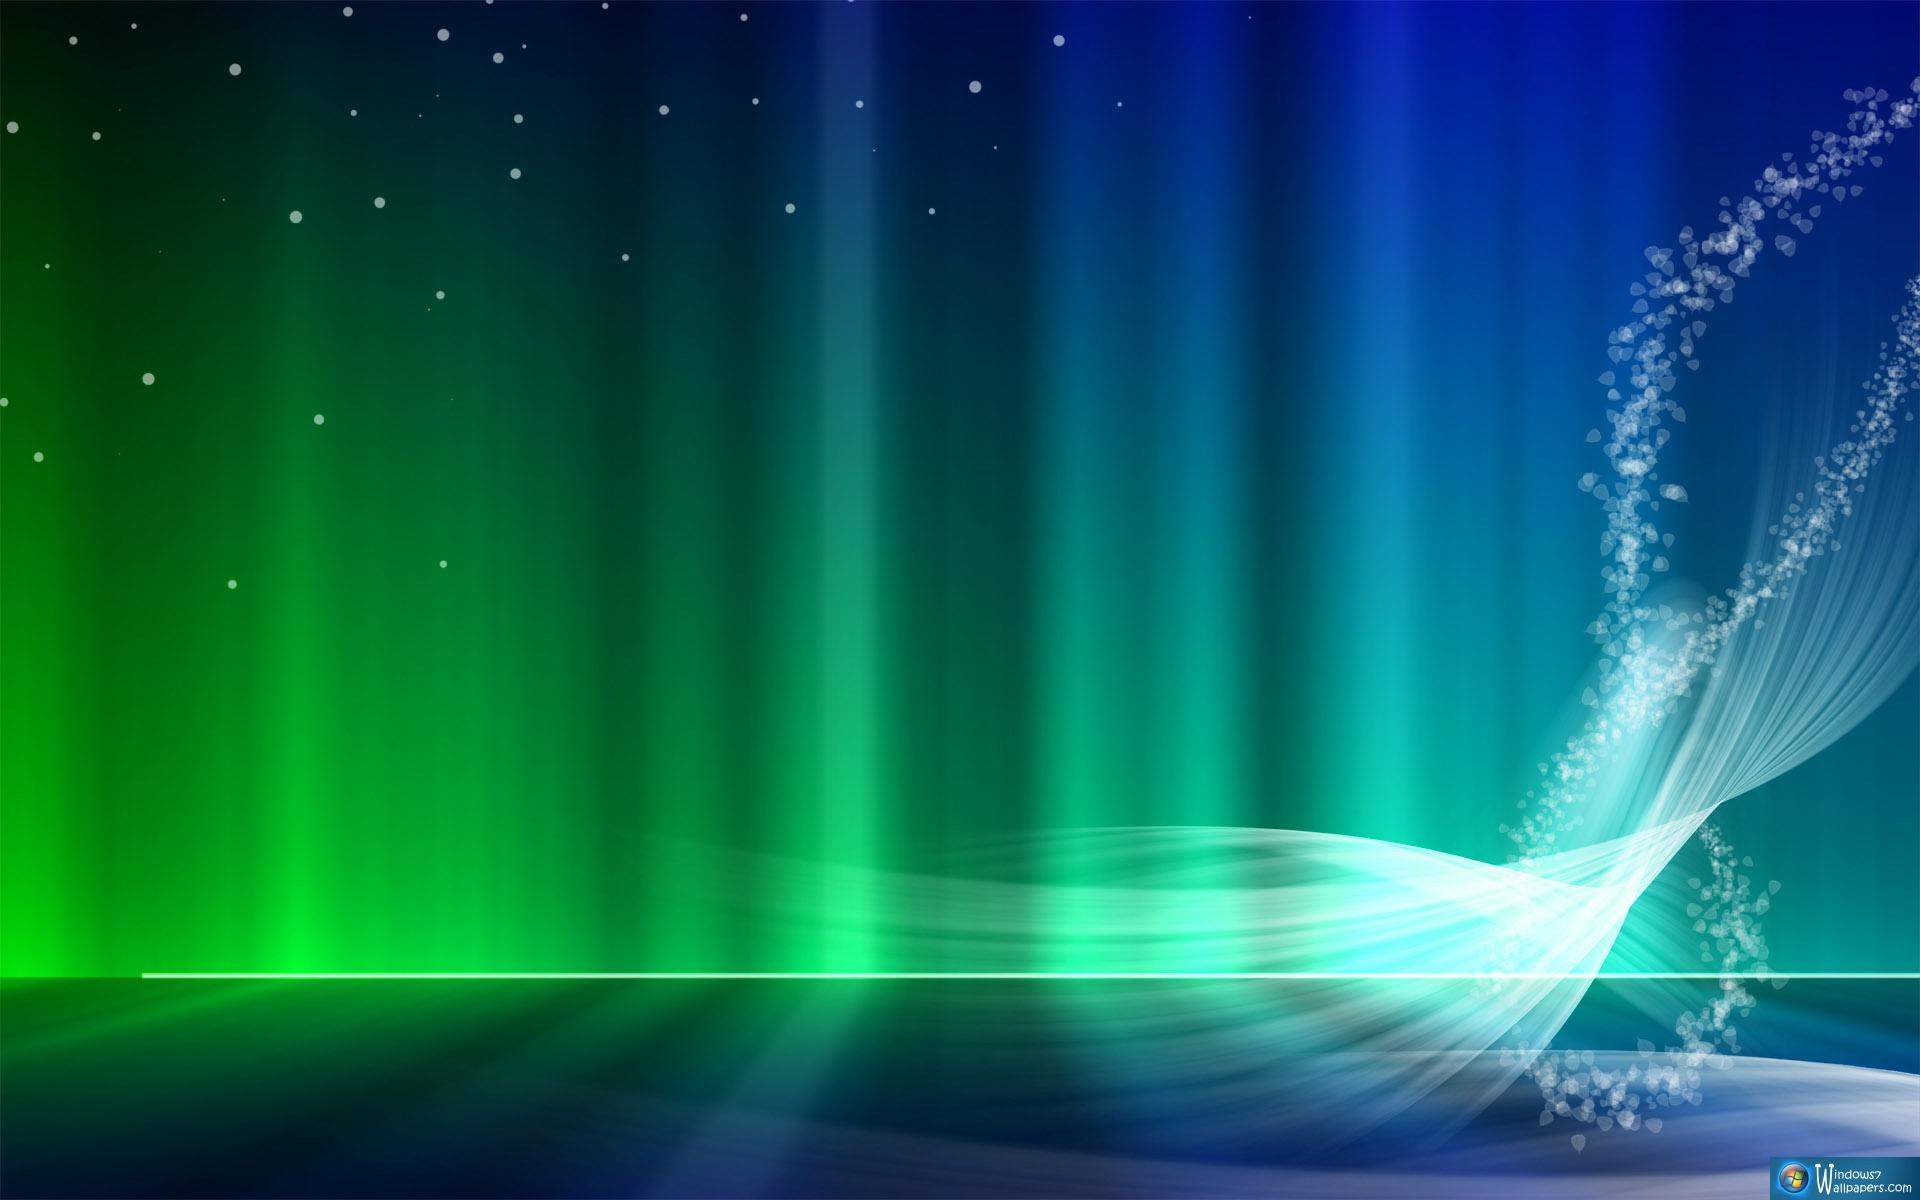 Free Backgrounds For Windows 7 - Wallpaper Cave